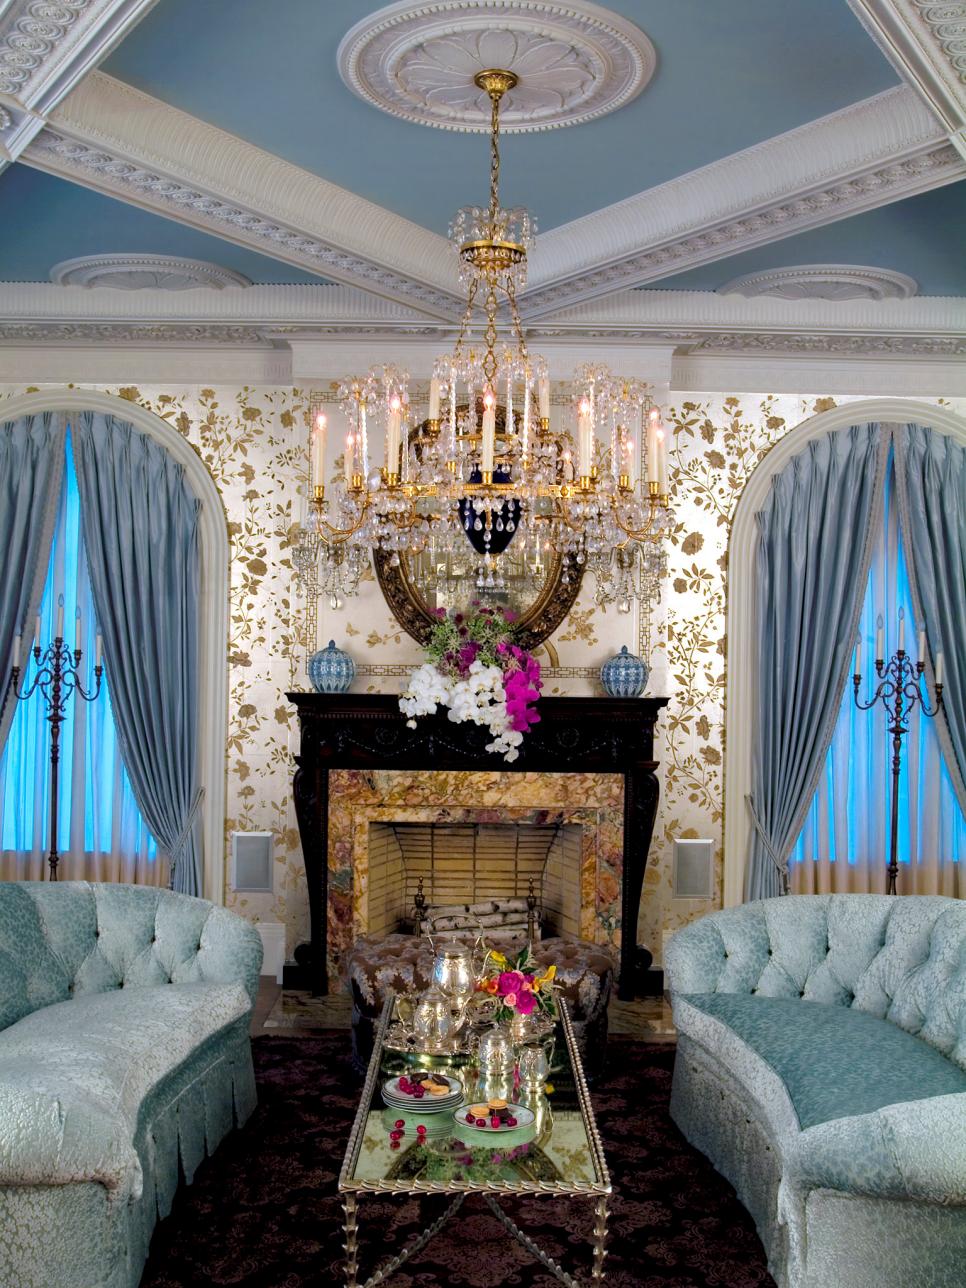 Living Room With Blue Sofas, Crystal Chandelier & Floral Wallpaper